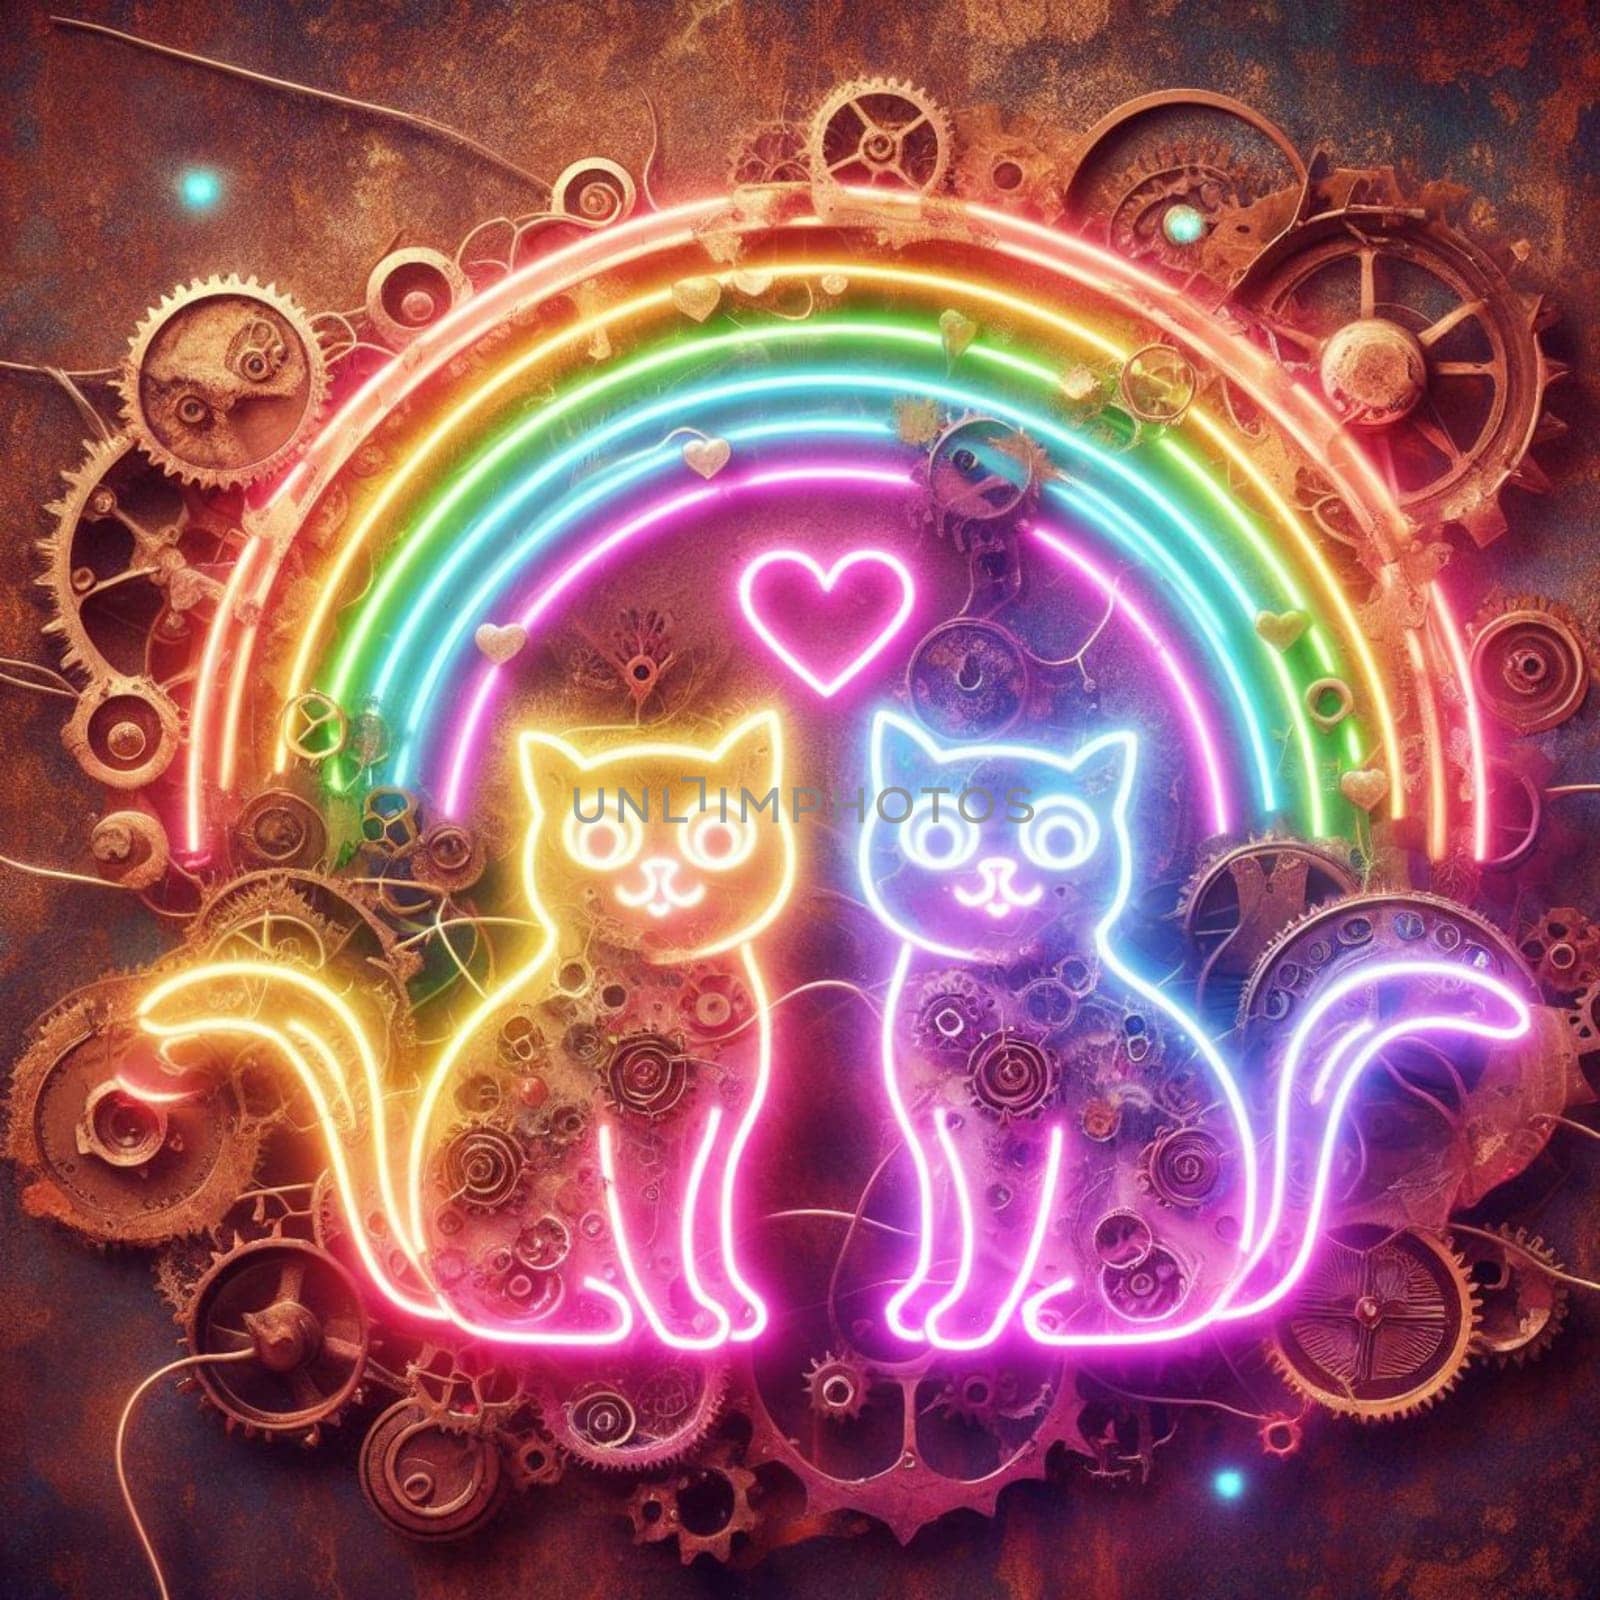 kittens in love steampunk neon valentines day illustration concept by verbano